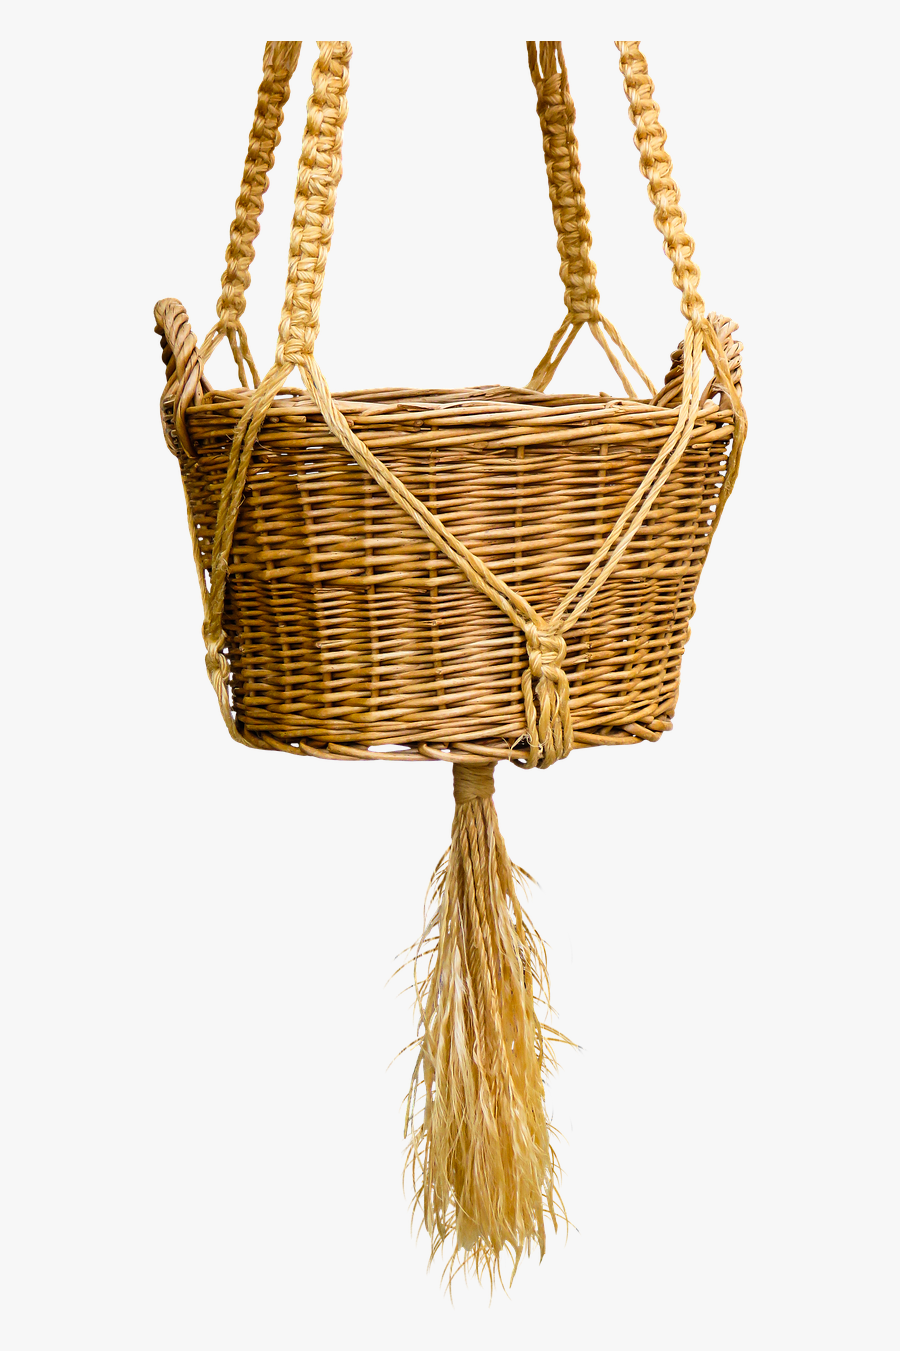 Basket Wicker Basket Isolated Kitten In The Basket-, Transparent Clipart